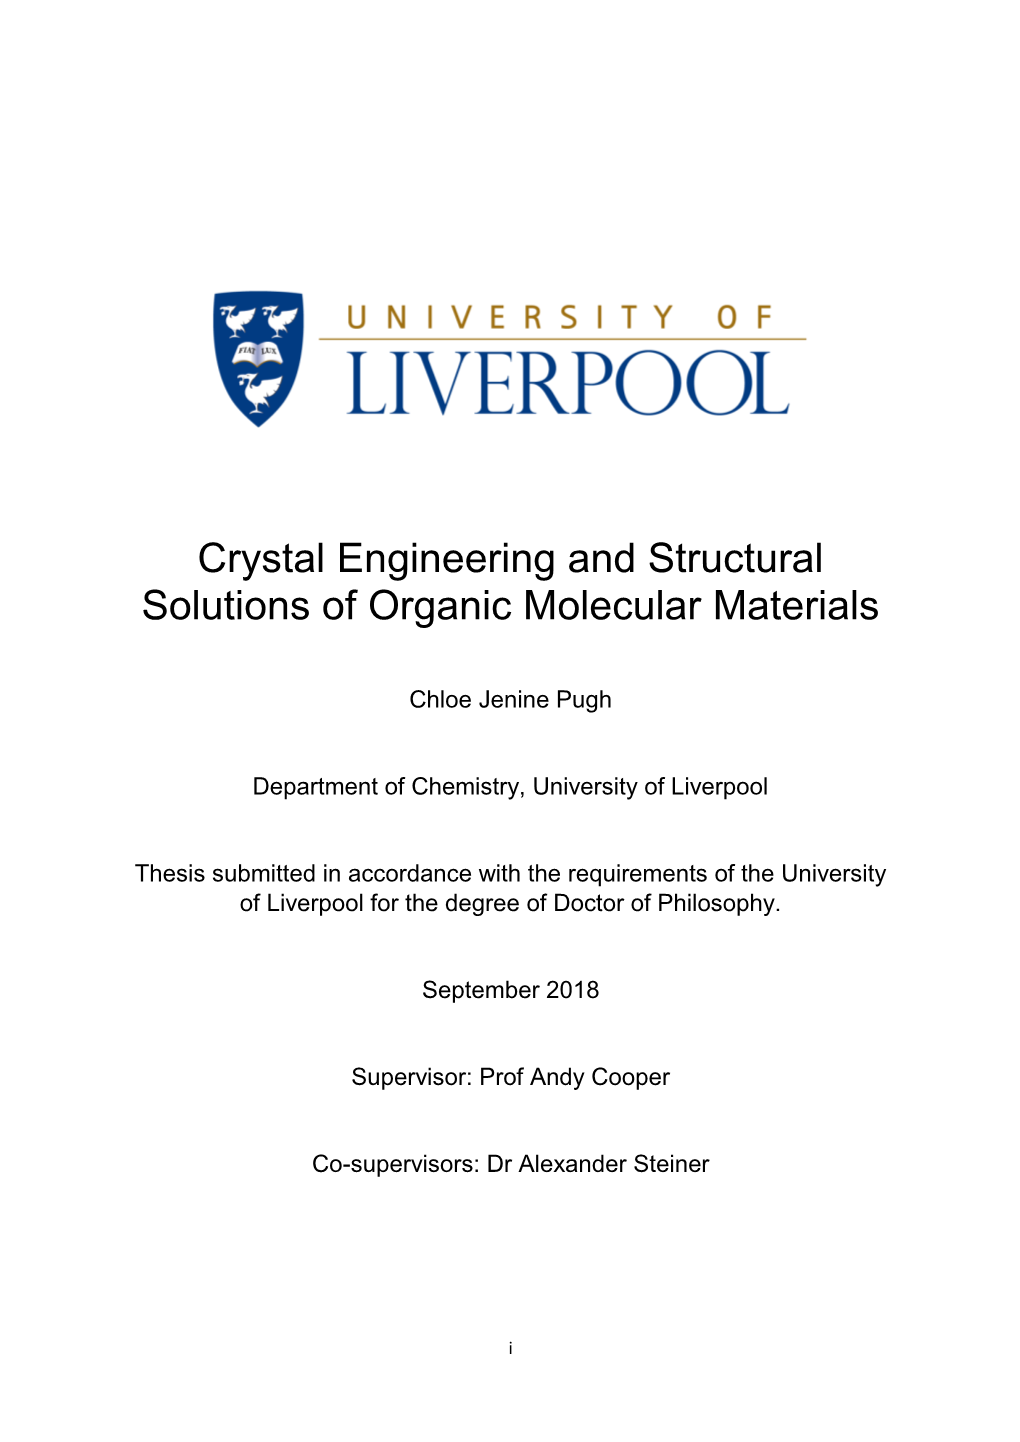 Crystal Engineering and Structural Solutions of Organic Molecular Materials